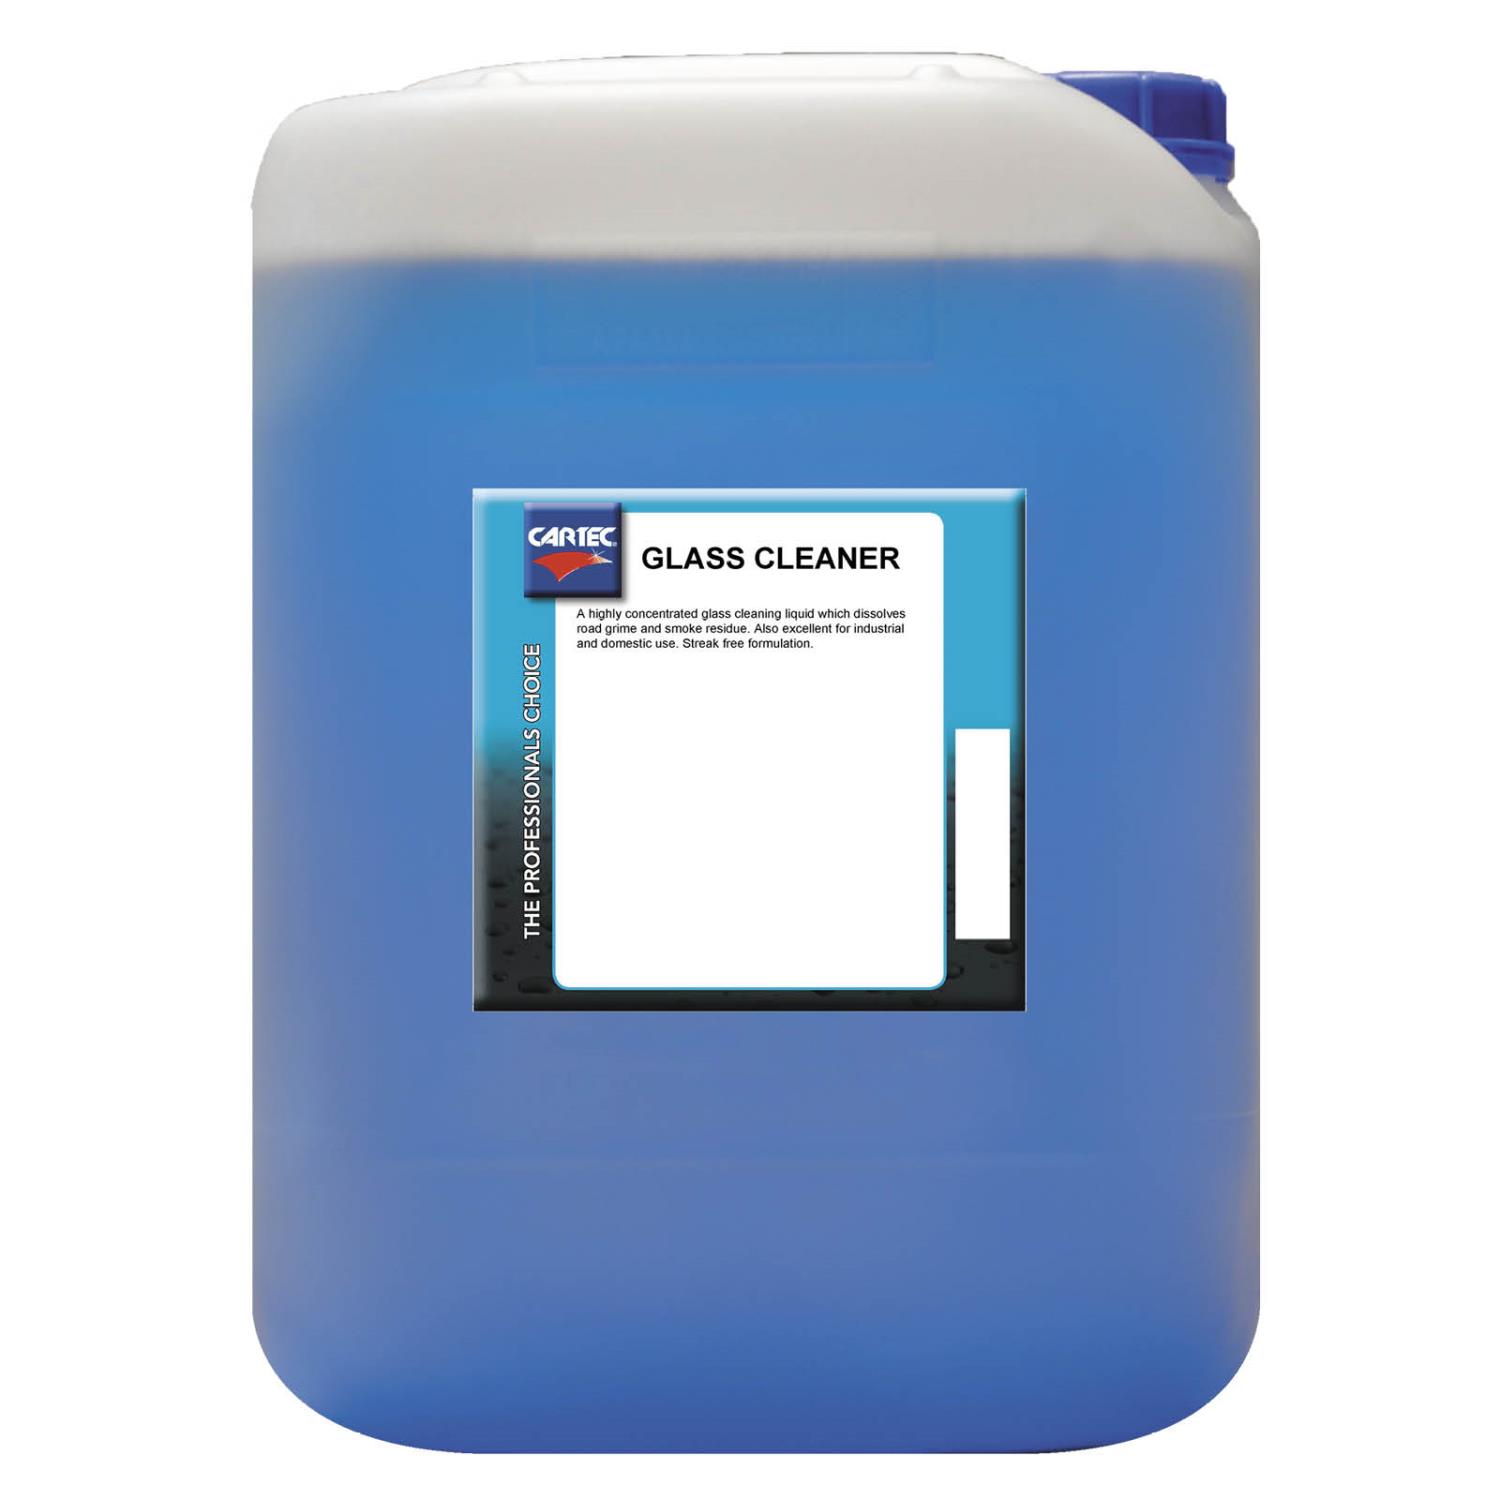 Cartec Glass Cleaner 20 Ltr.